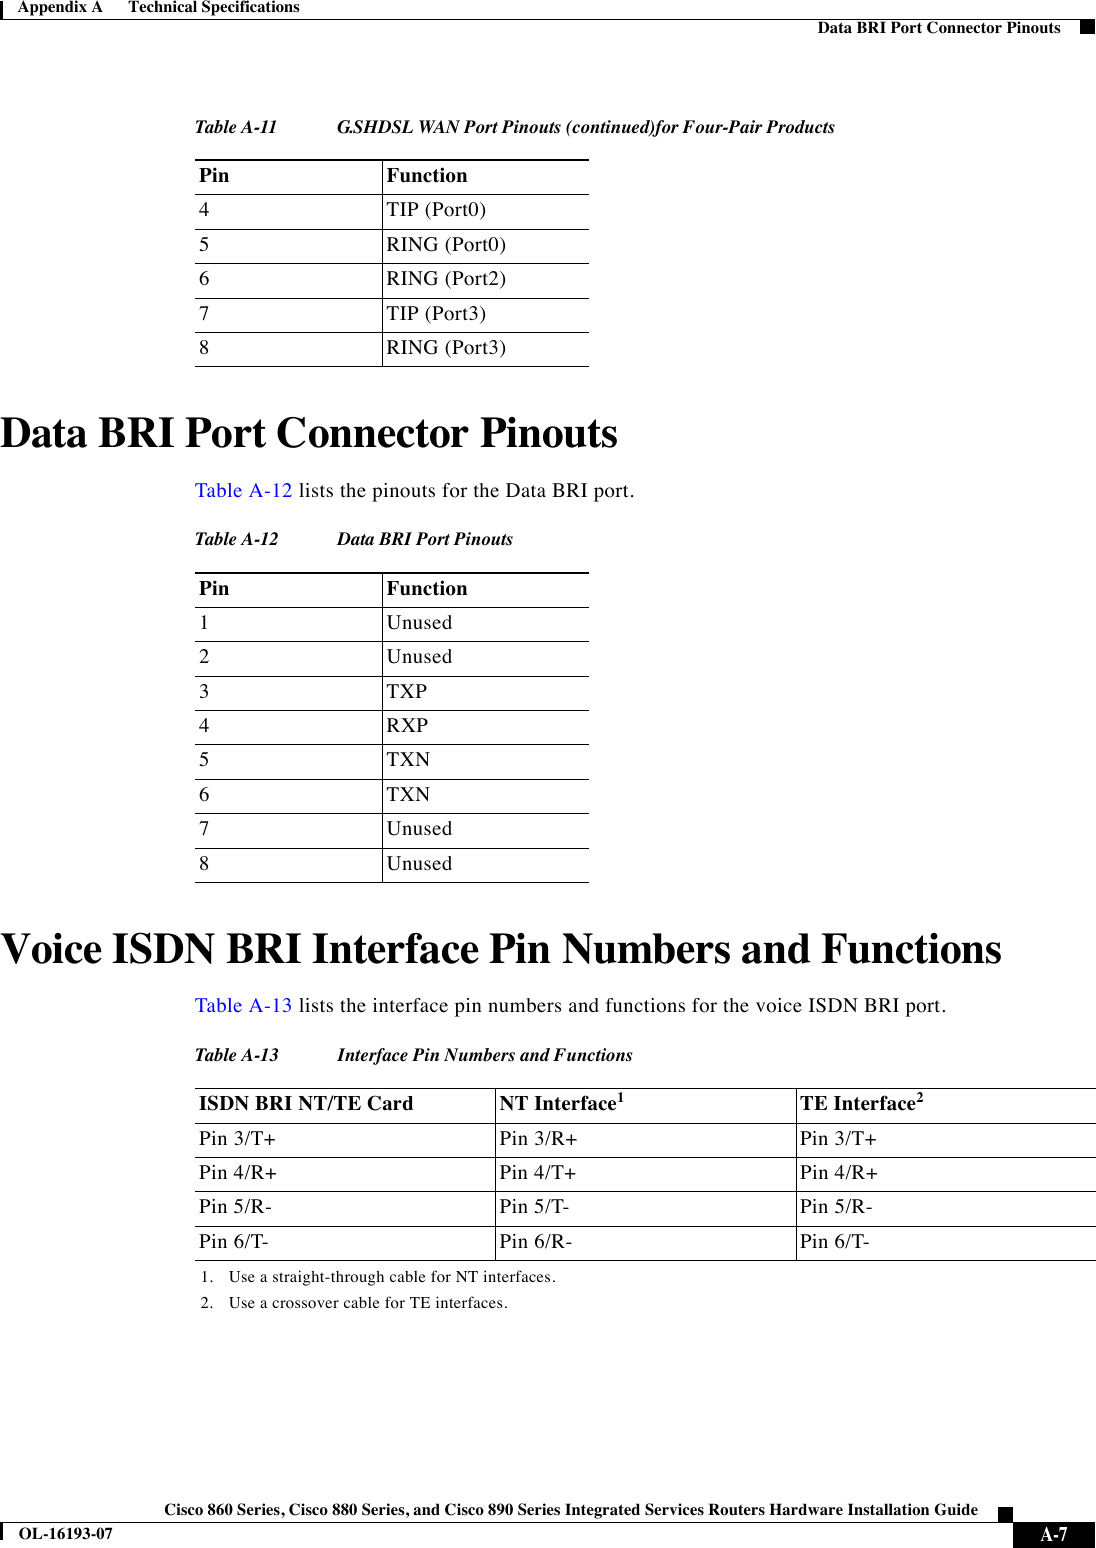  A-7Cisco 860 Series, Cisco 880 Series, and Cisco 890 Series Integrated Services Routers Hardware Installation GuideOL-16193-07Appendix A      Technical Specifications  Data BRI Port Connector PinoutsData BRI Port Connector PinoutsTable A-12 lists the pinouts for the Data BRI port.Voice ISDN BRI Interface Pin Numbers and FunctionsTable A-13 lists the interface pin numbers and functions for the voice ISDN BRI port.4TIP (Port0)5RING (Port0)6RING (Port2)7TIP (Port3)8RING (Port3)Table A-11 G.SHDSL  WAN Port Pinouts (continued)for Four-Pair ProductsPin FunctionTabl e A-12 Data BRI Port Pinouts Pin Function1Unused2Unused3TXP4RXP5TXN6TXN7Unused8UnusedTabl e A-13 Interface Pin Numbers and Functions ISDN BRI NT/TE Card NT Interface11. Use a straight-through cable for NT interfaces.TE Interface22. Use a crossover cable for TE interfaces. Pin 3/T+ Pin 3/R+ Pin 3/T+Pin 4/R+ Pin 4/T+  Pin 4/R+Pin 5/R- Pin 5/T-  Pin 5/R- Pin 6/T- Pin 6/R- Pin 6/T-